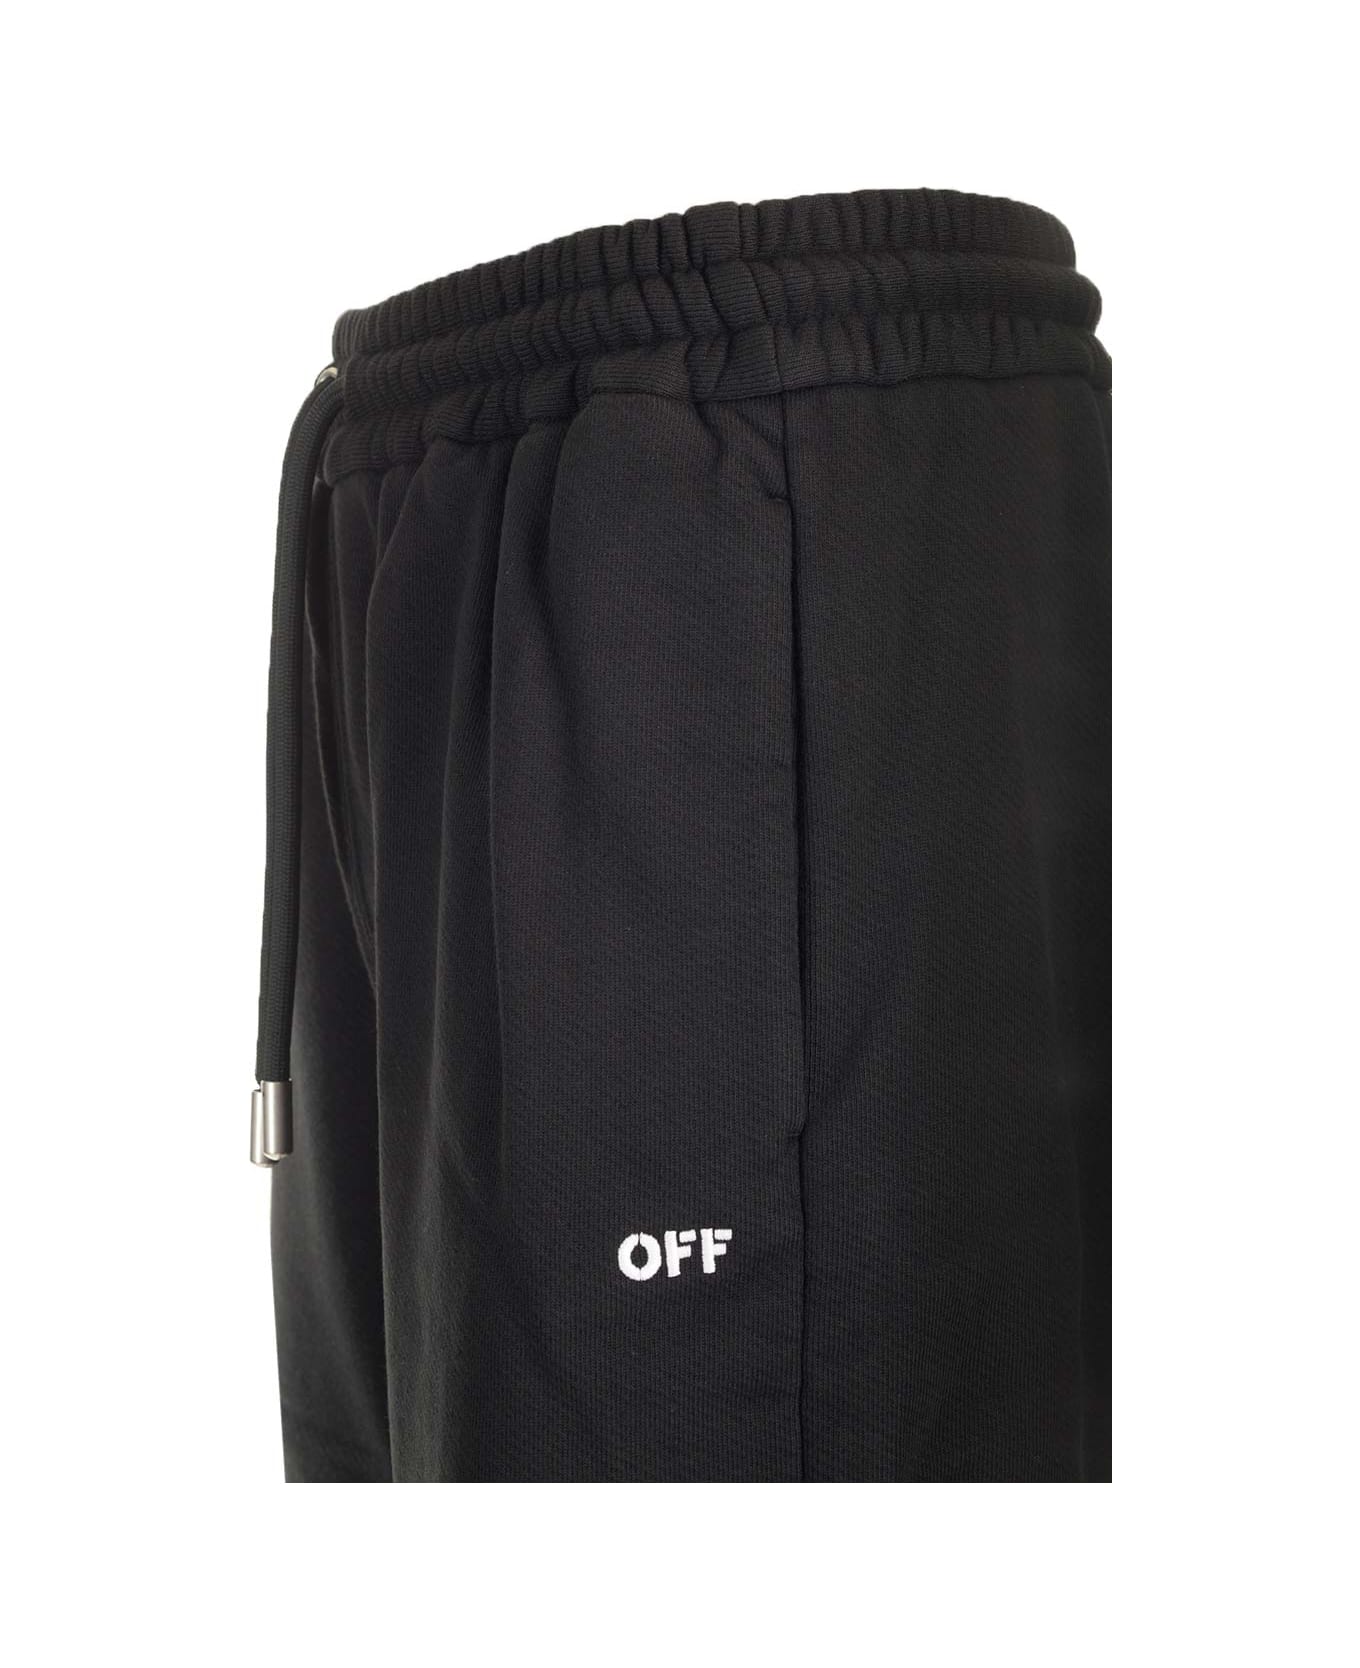 Off-White Cornely Diags Tracksuit Pants - Black